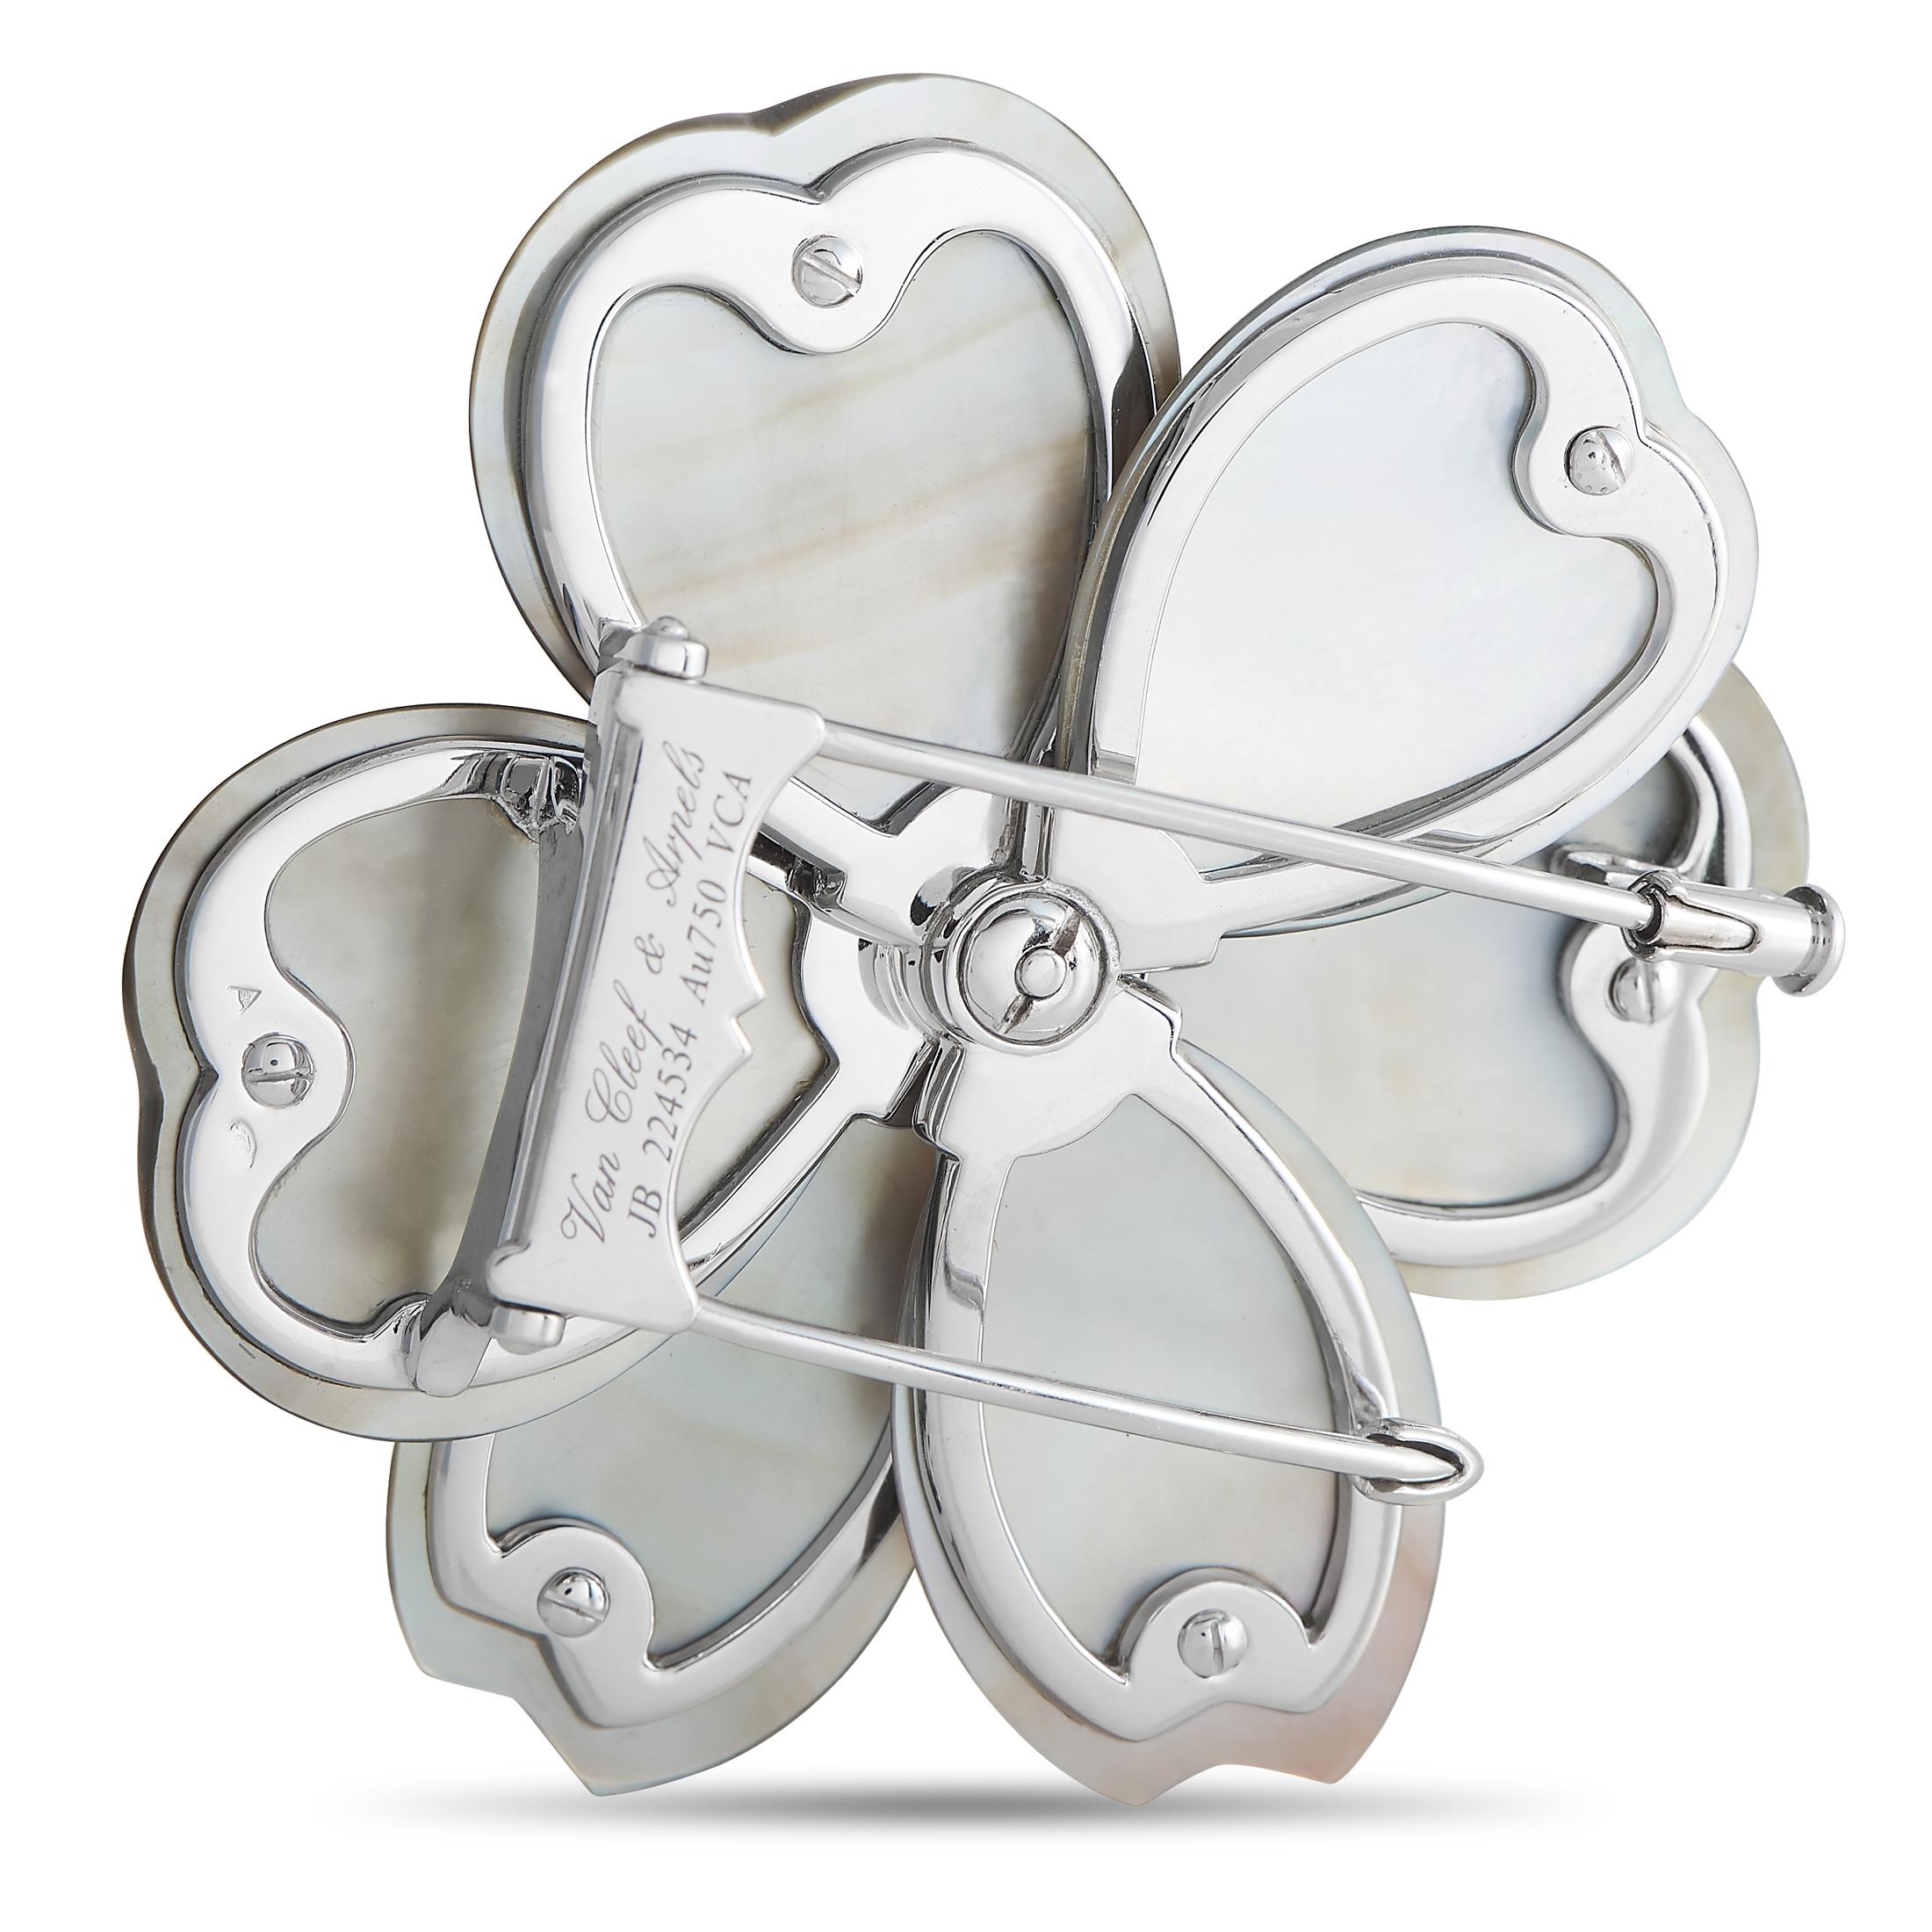 This elegant brooch from the Rose de Noel collection from Van Cleef & Arpels will continually take your breath away. The striking 18K white gold floral motif comes to life thanks to captivating black Mother of Pearl petals and 1.54 carats of